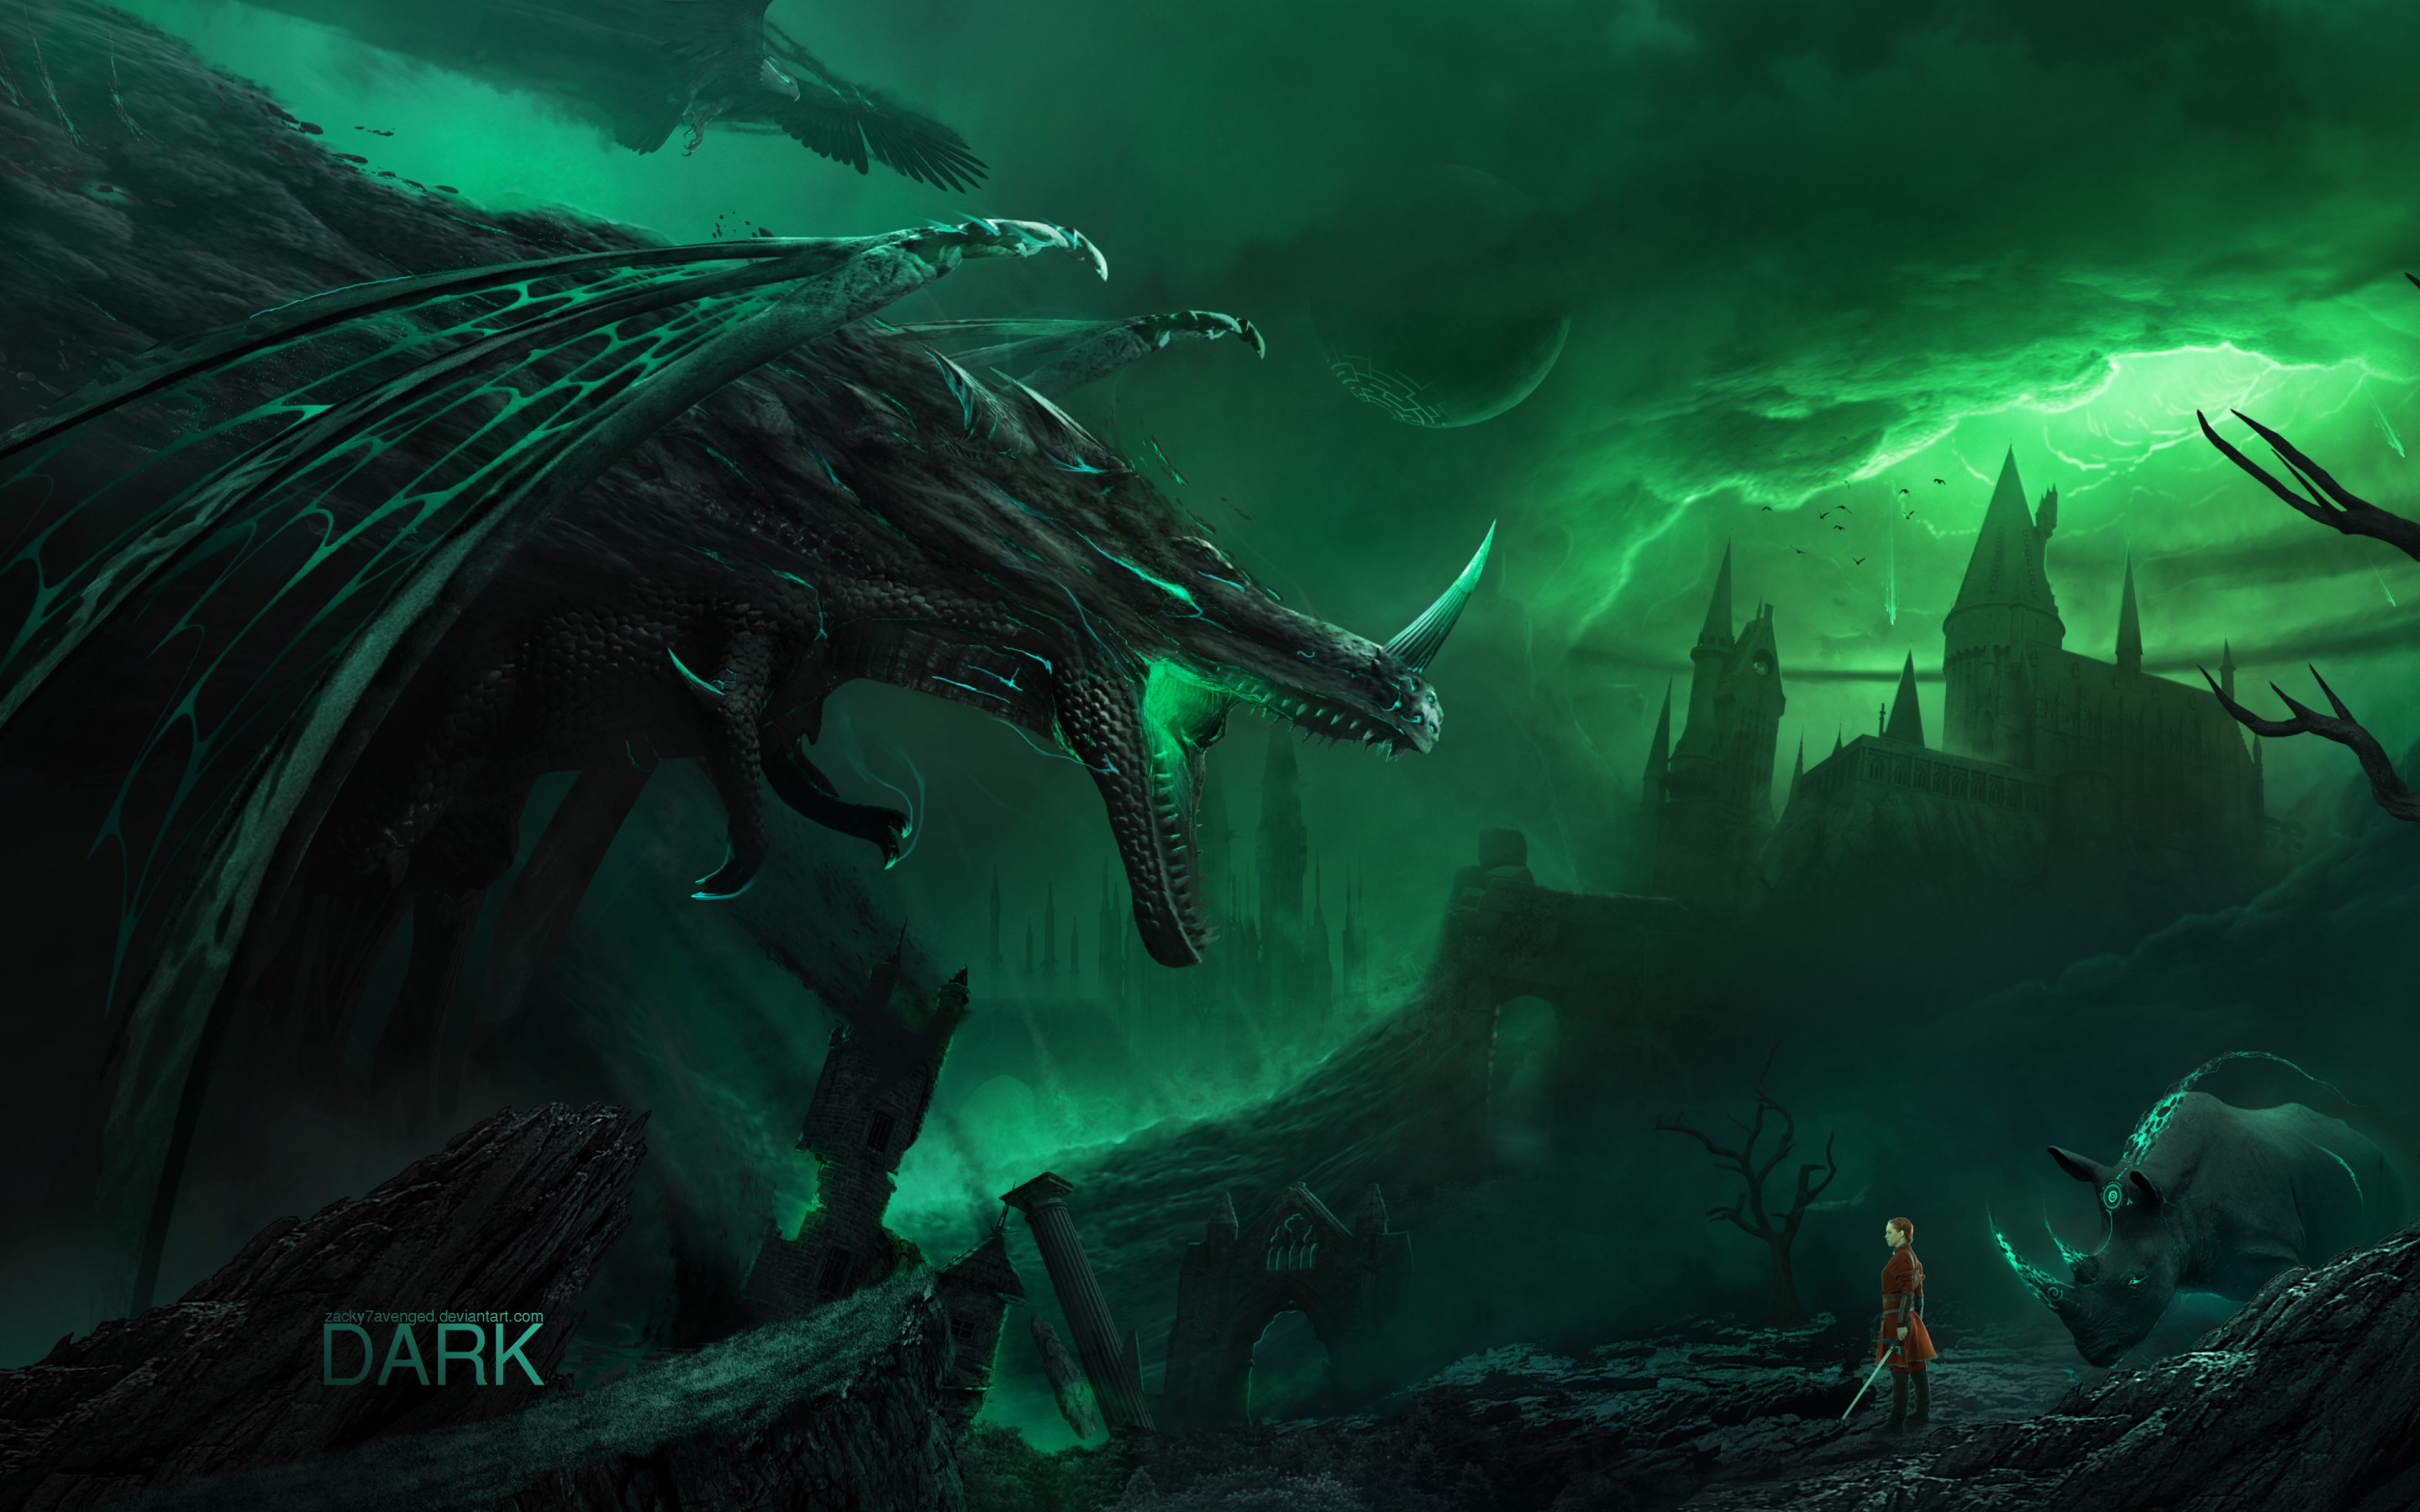 The dark creatures are coming wallpaper 2880x1800